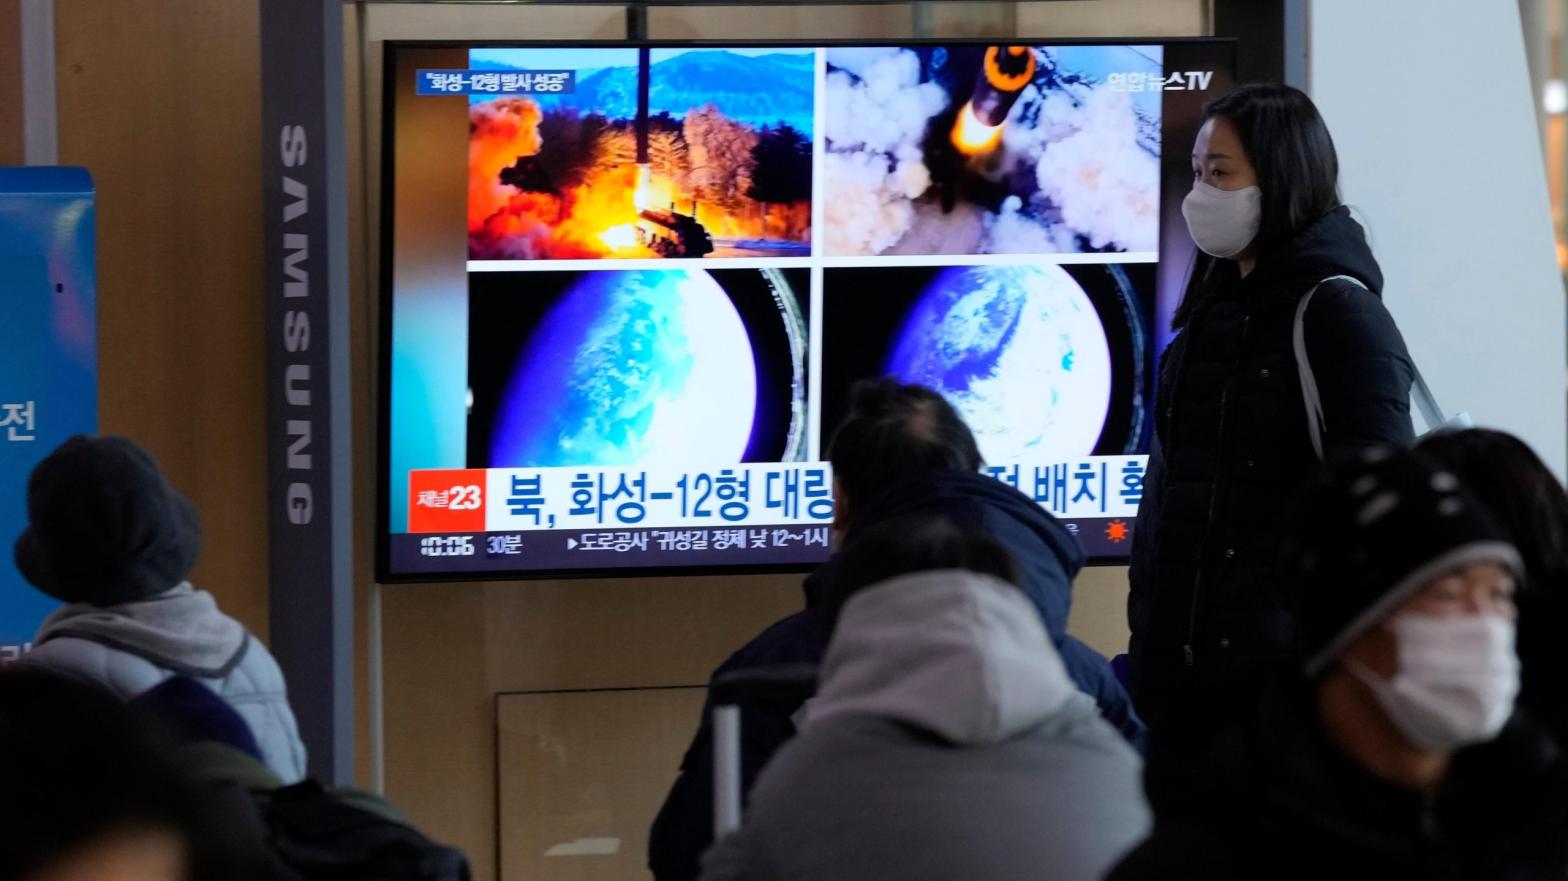 A TV showing images of North Korea's missile launch at the Seoul Railway Station in Seoul, South Korea on January 31, 2022. (Photo: Ahn Young-joon, AP)